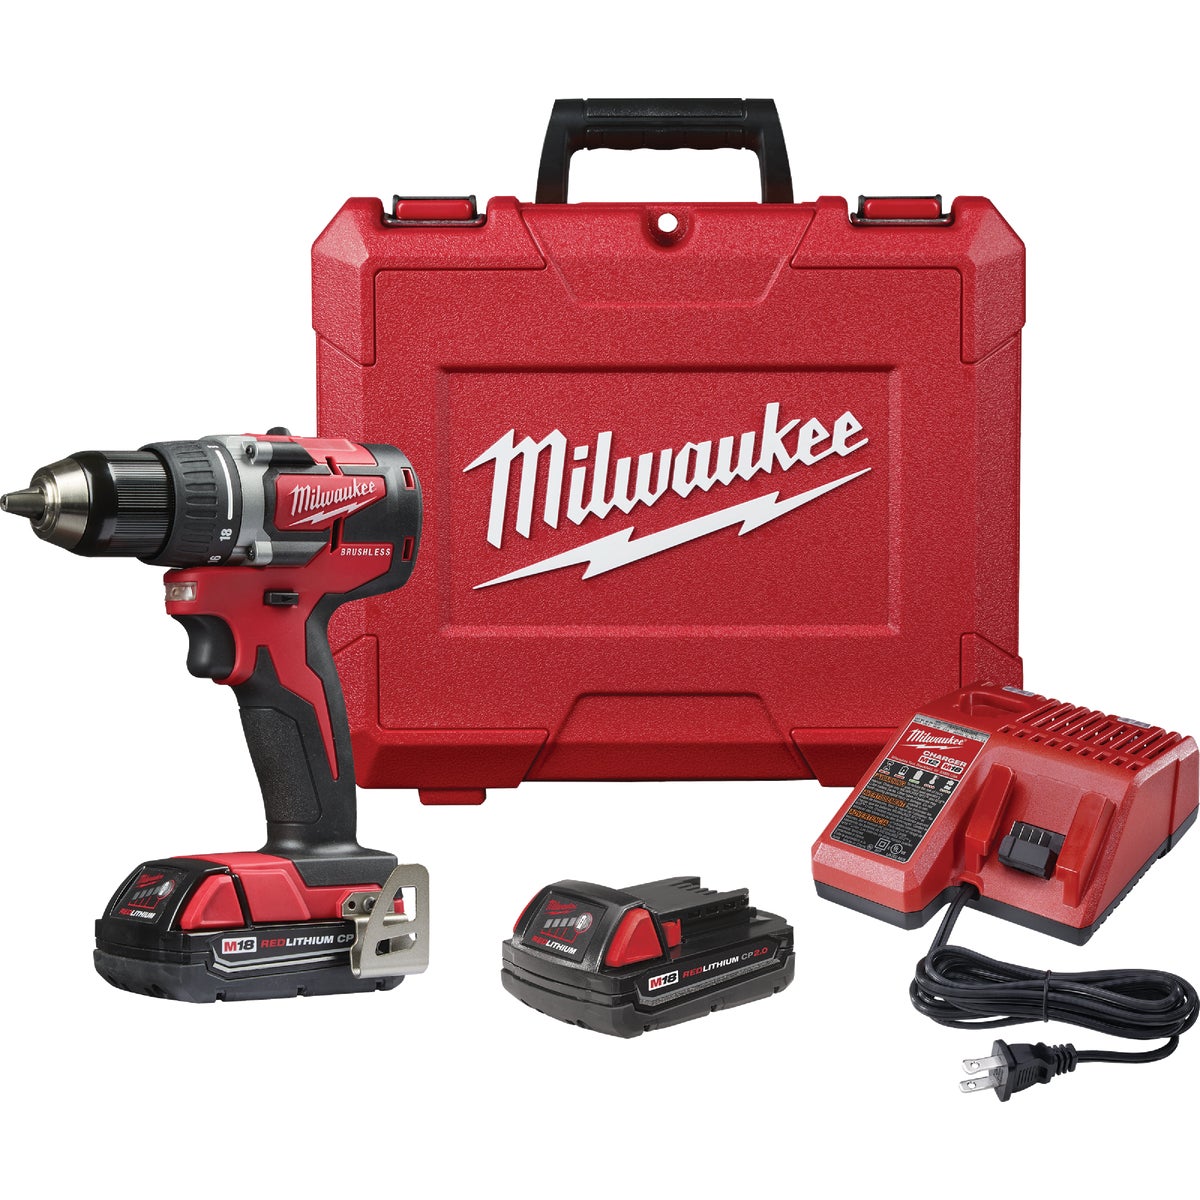 Milwaukee M18 Brushless 1/2 In. Compact Cordless Drill/Driver Kit